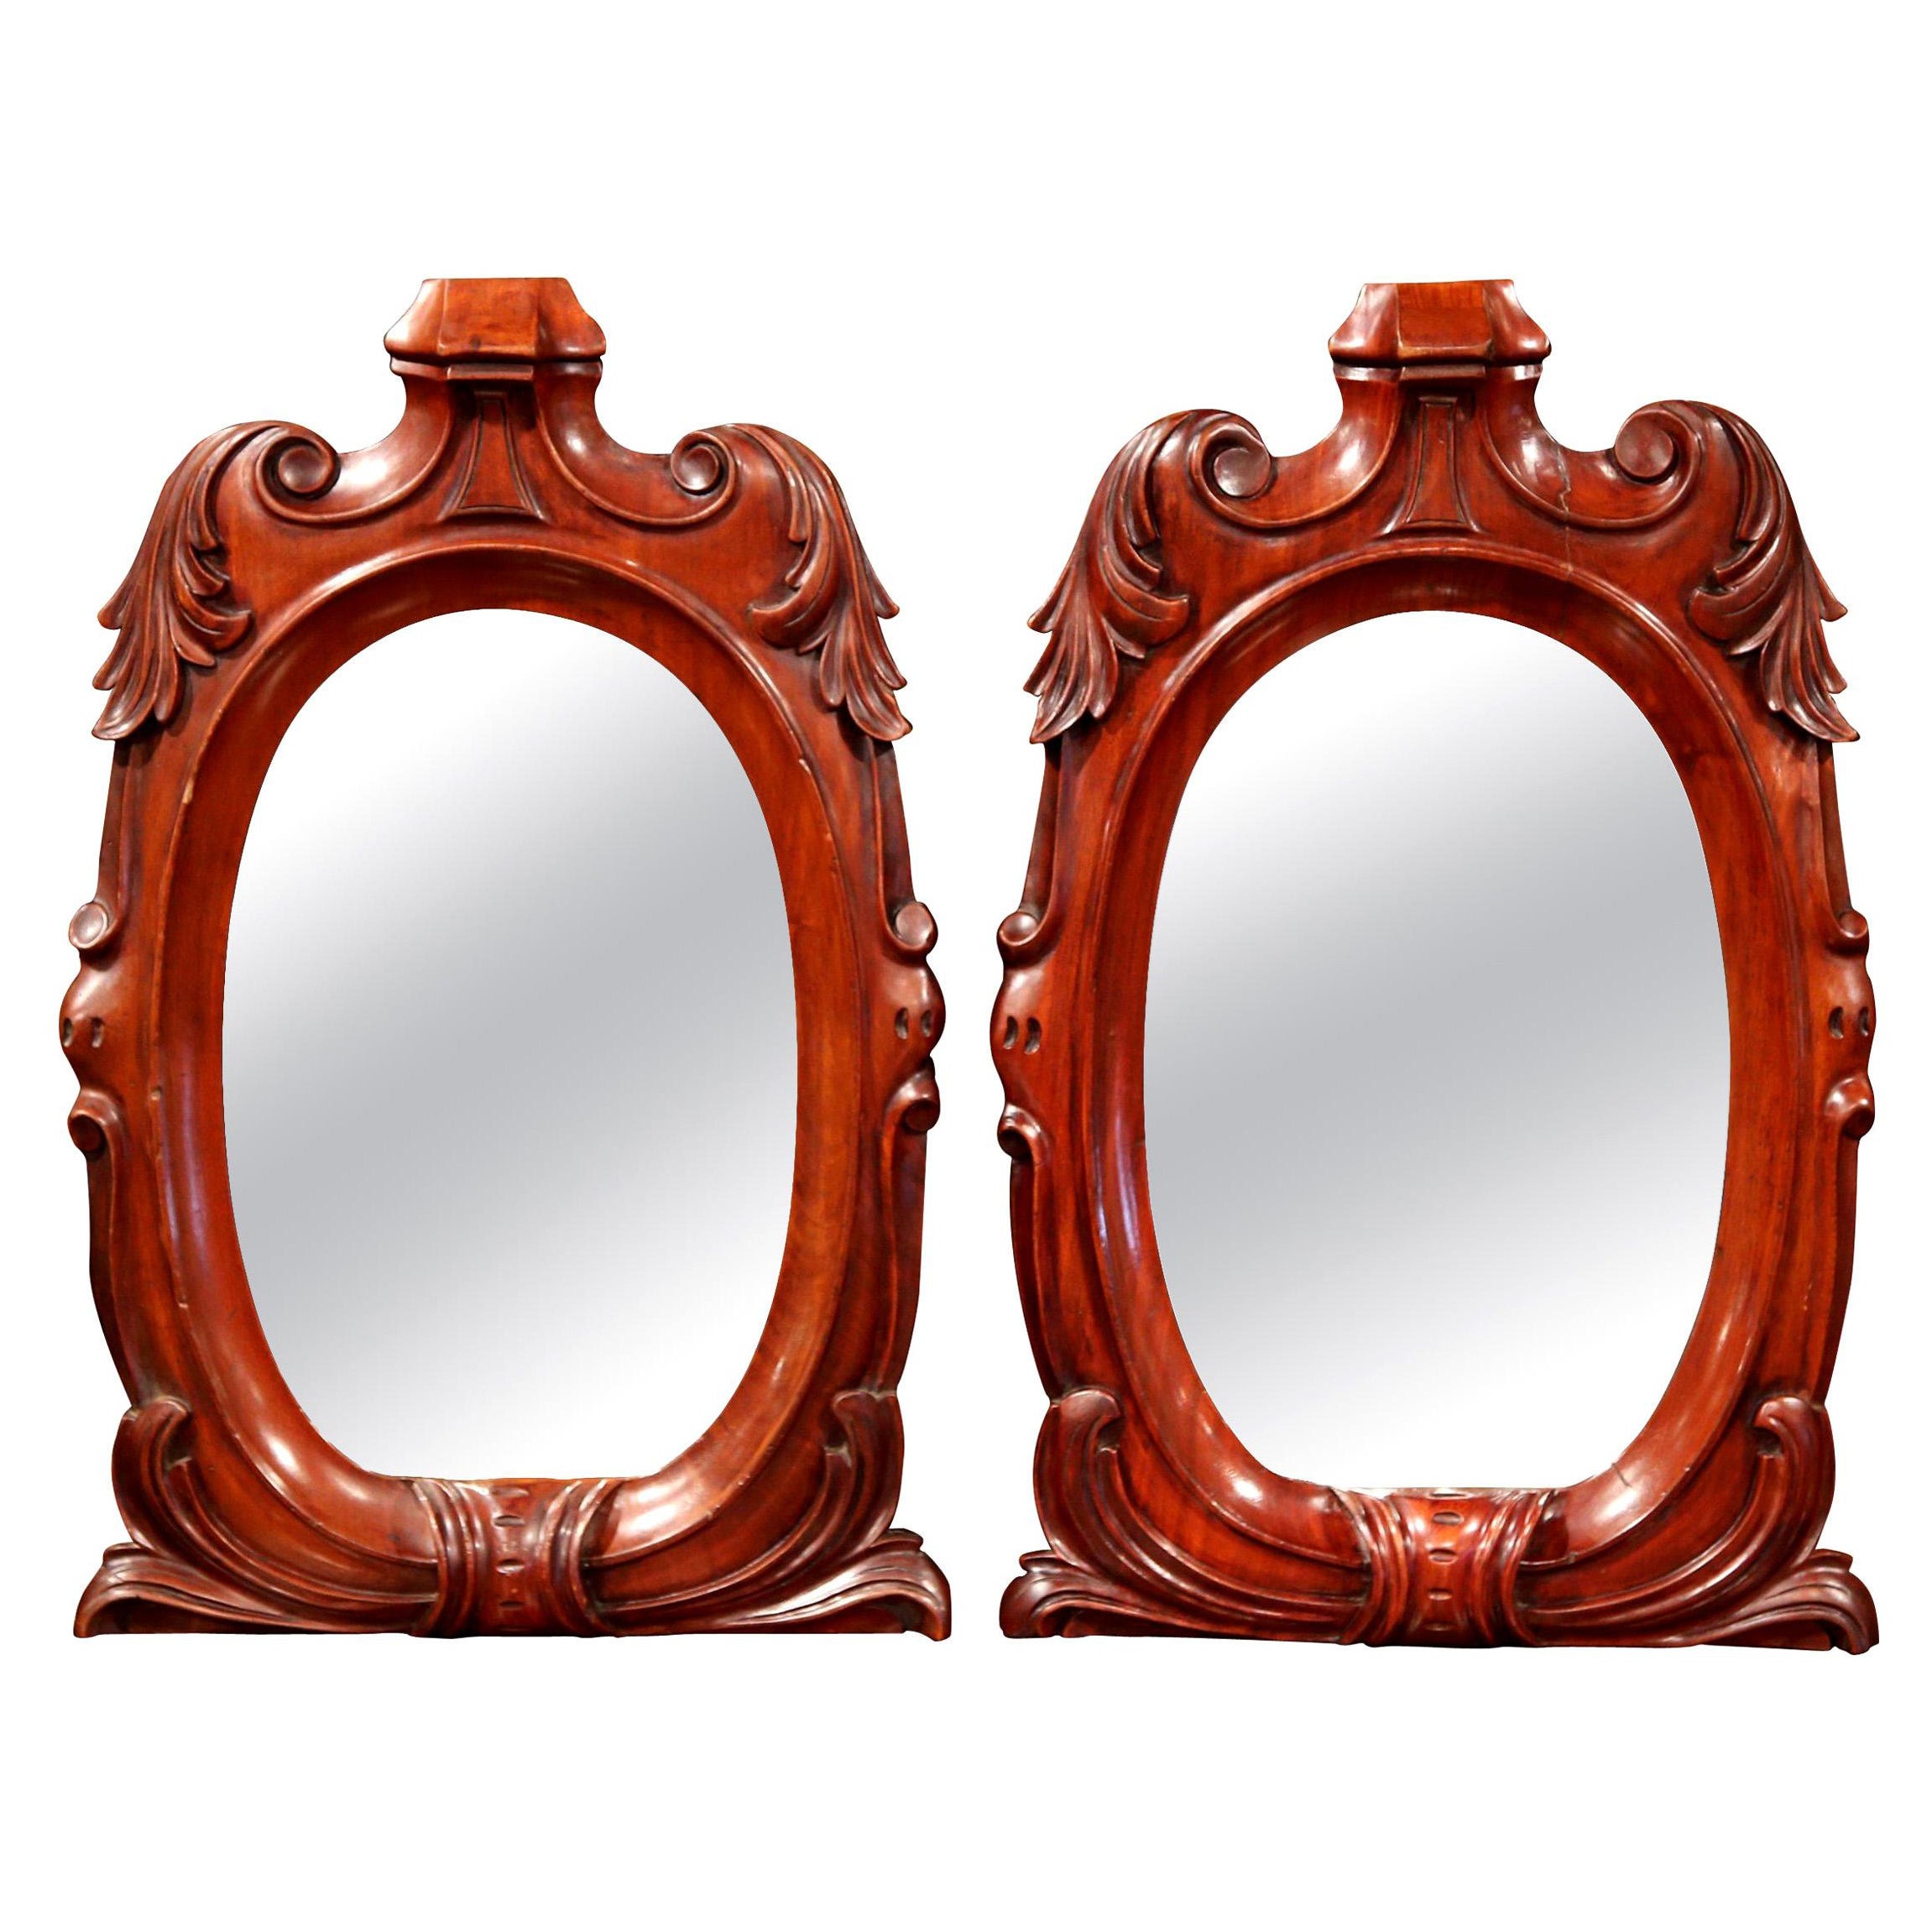 Pair of 19th Century French Regency Hand Carved Mahogany Wall Mirrors For Sale